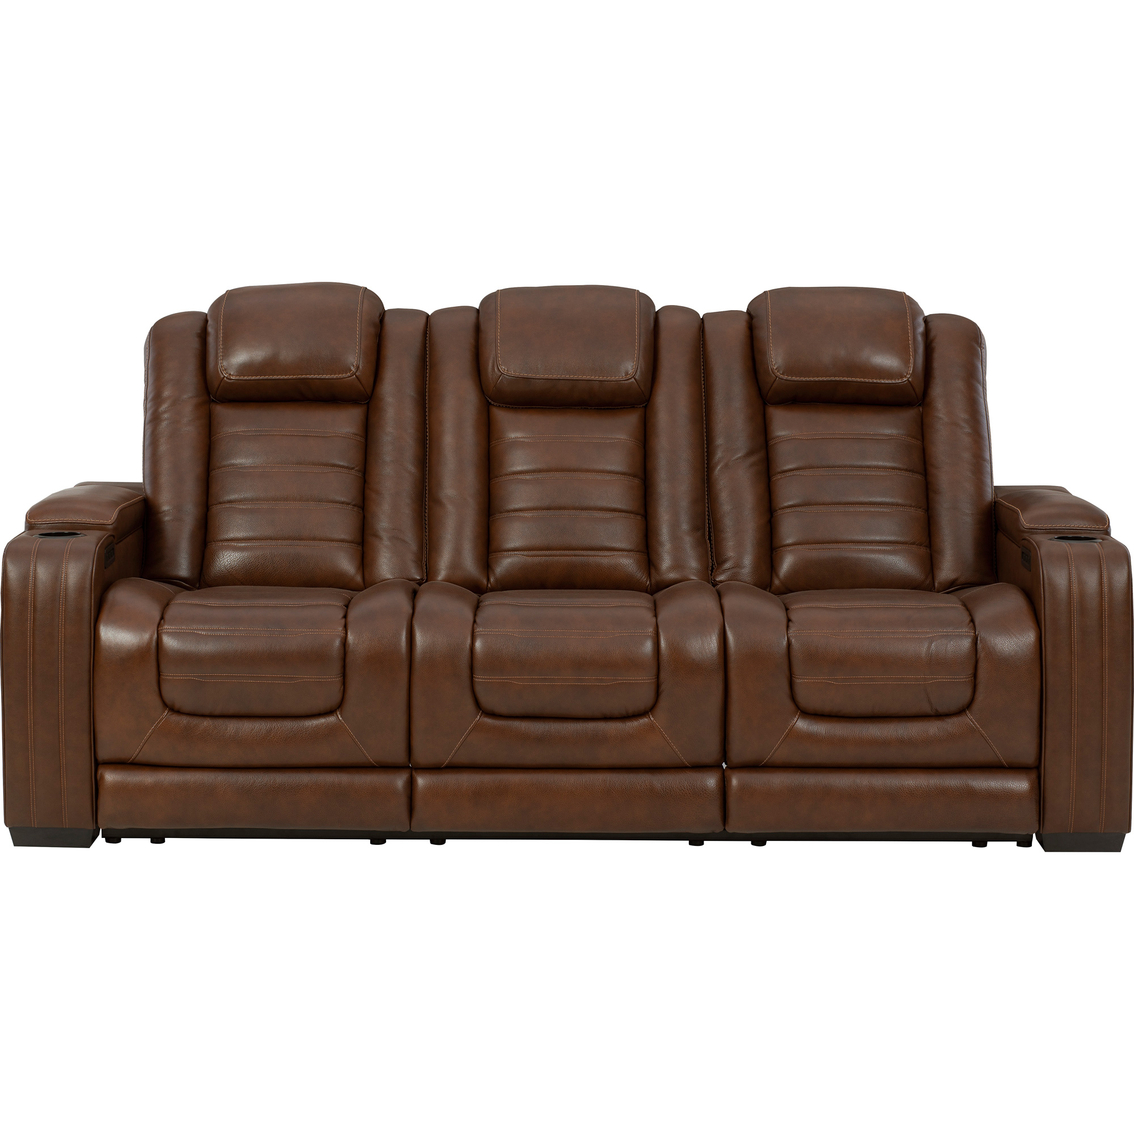 Signature Design by Ashley Backtrack Power Reclining Sofa with Adjustable Headrest - Image 2 of 10